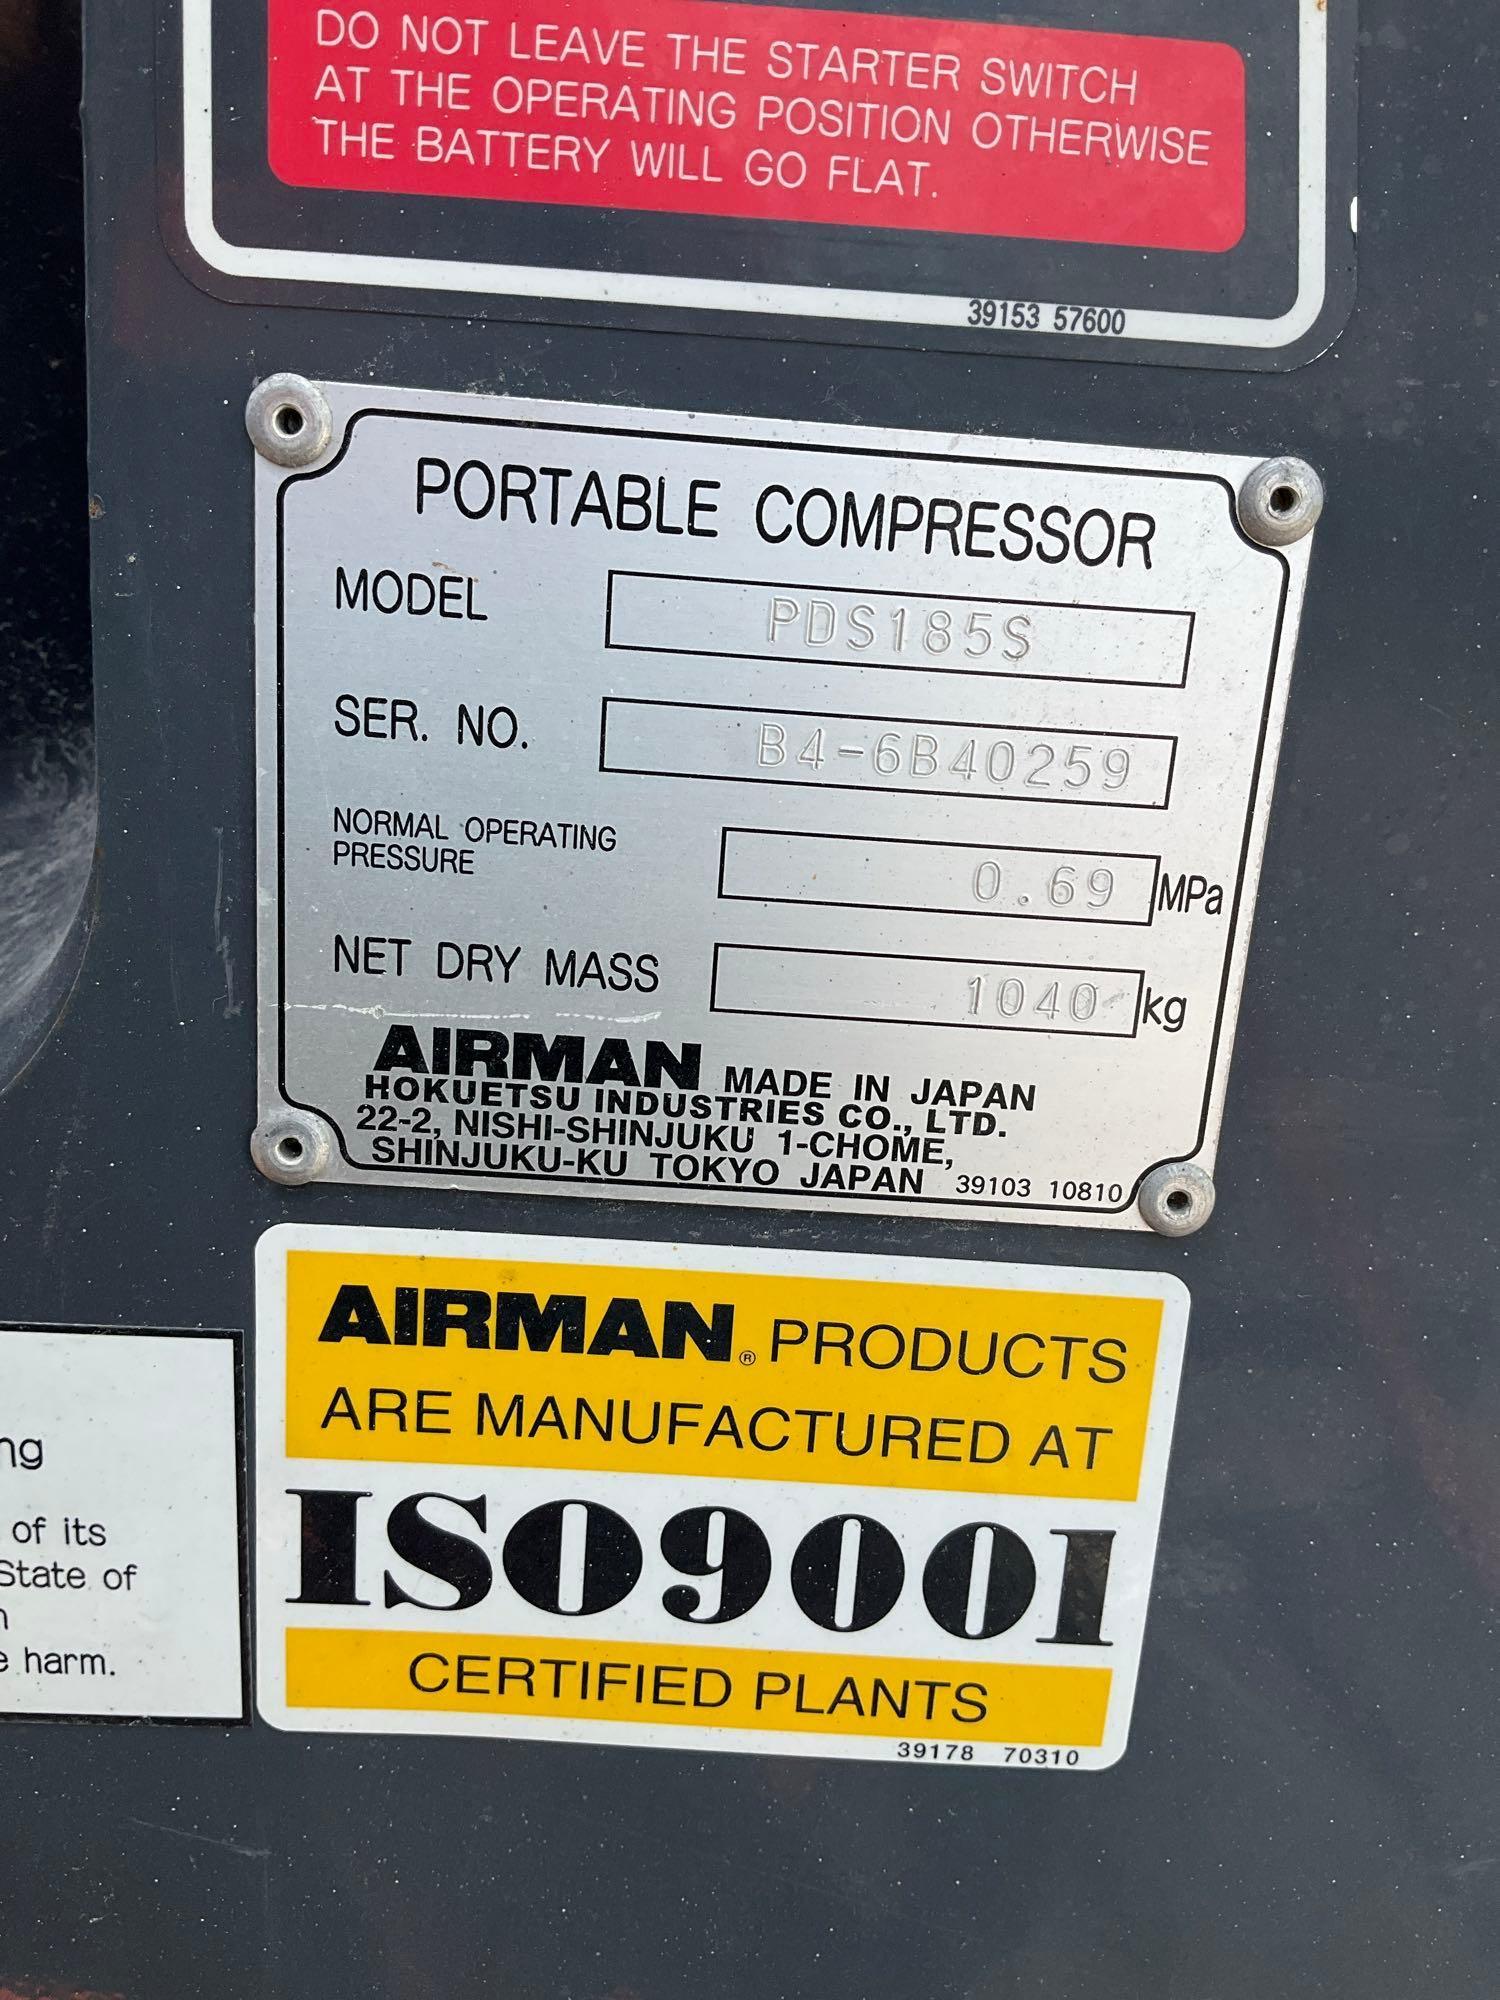 AIRMAN...PDS185S... PORTABLE COMPRESSOR, DIESEL, TRAILER MOUNTED, NEW BATTERY LOW HRS, RUNS & OPE...